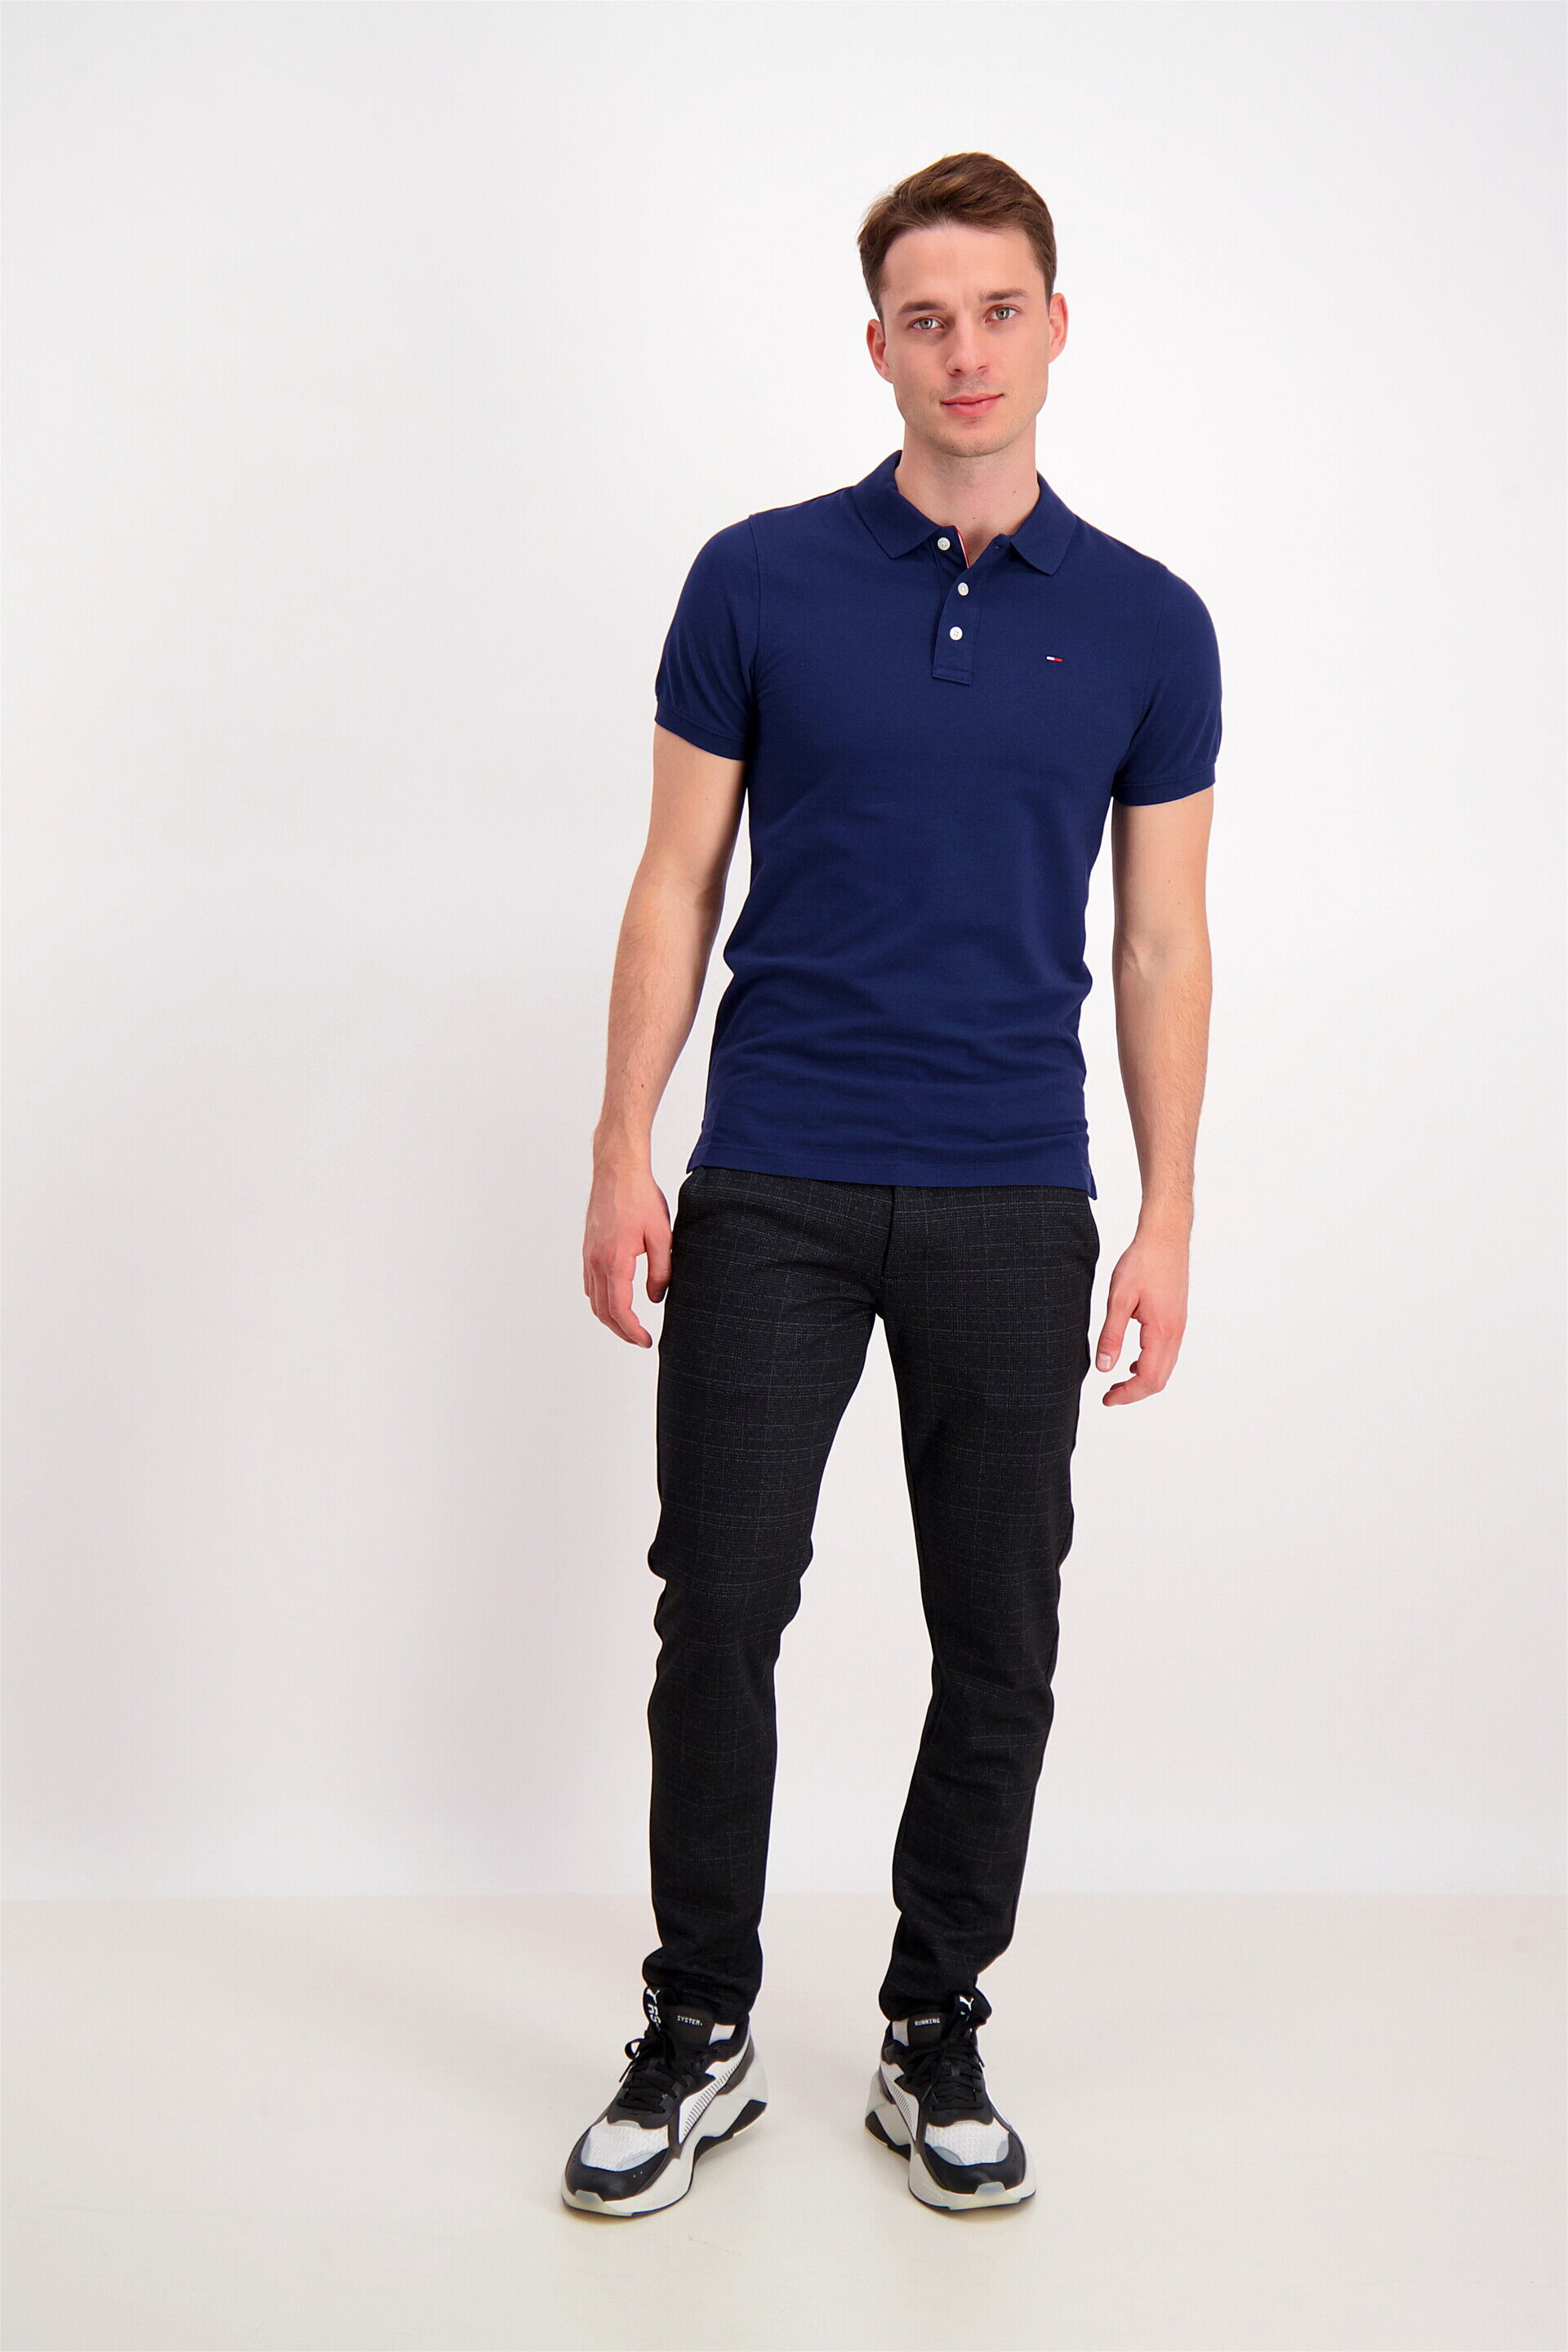 Tommy Jeans  Poloshirt 90-400786